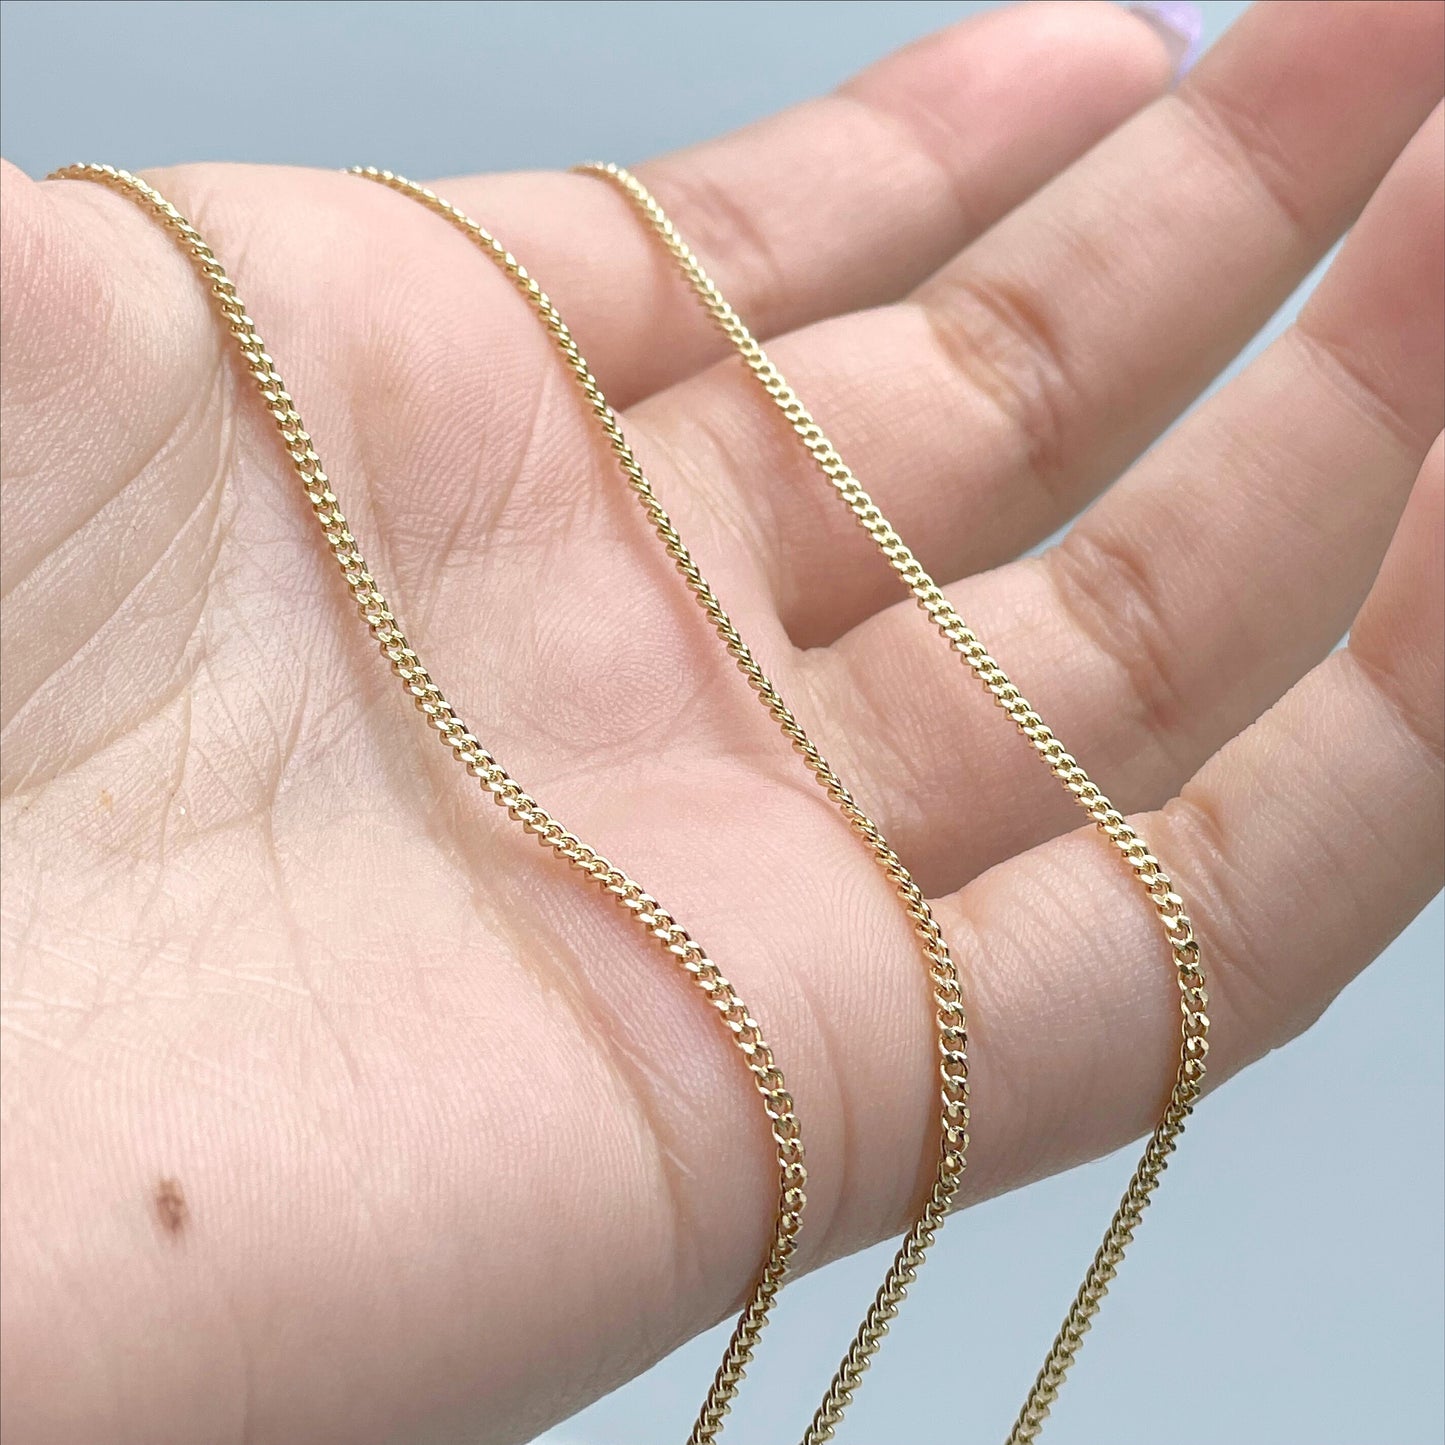 18k Gold Filled Cuban Link Chain 1.5mm of thickness, 16, 18 or 20 inches with extender, Unisex Curb Link Wholesale Jewelry Making Supplies